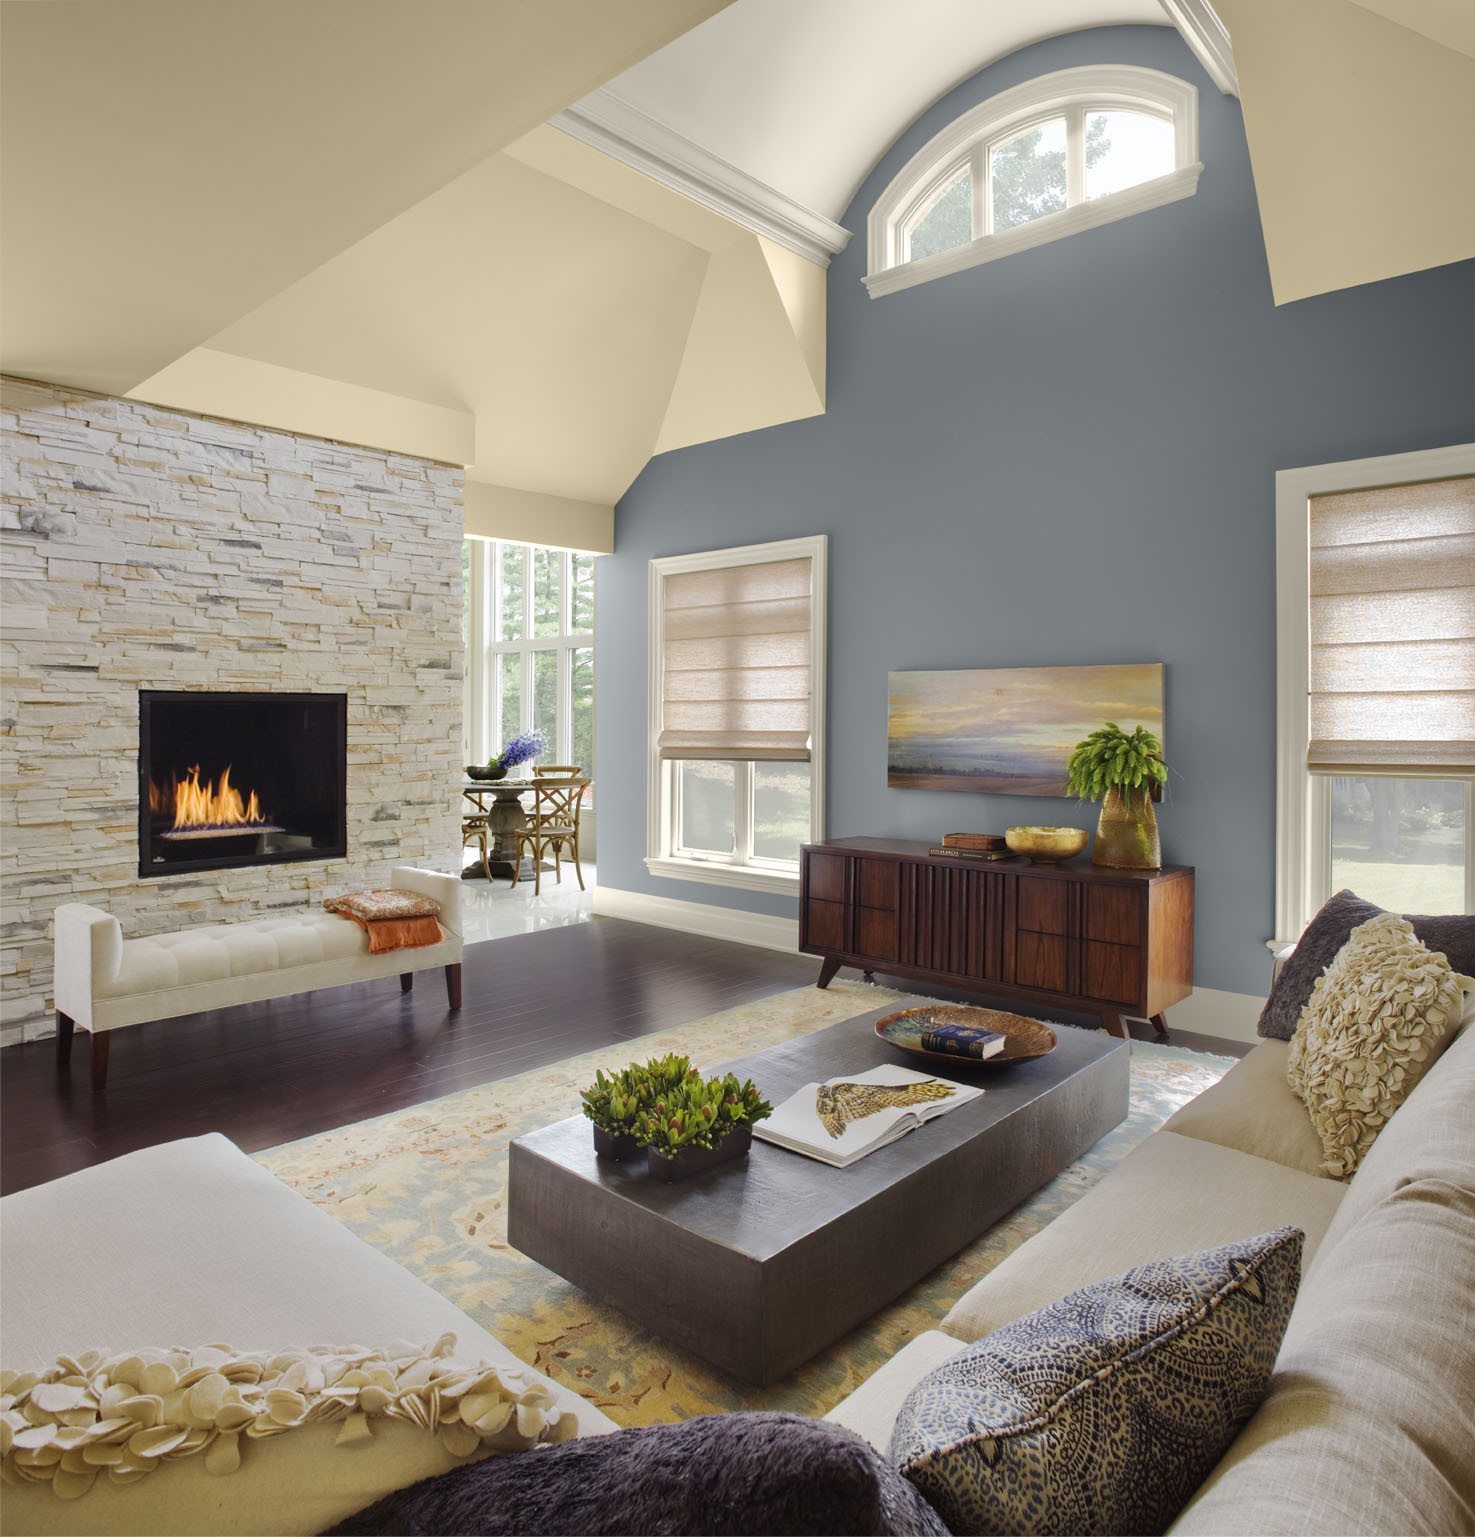 Best ideas about Living Room Colors . Save or Pin Vaulted Living Room Ideas Now.